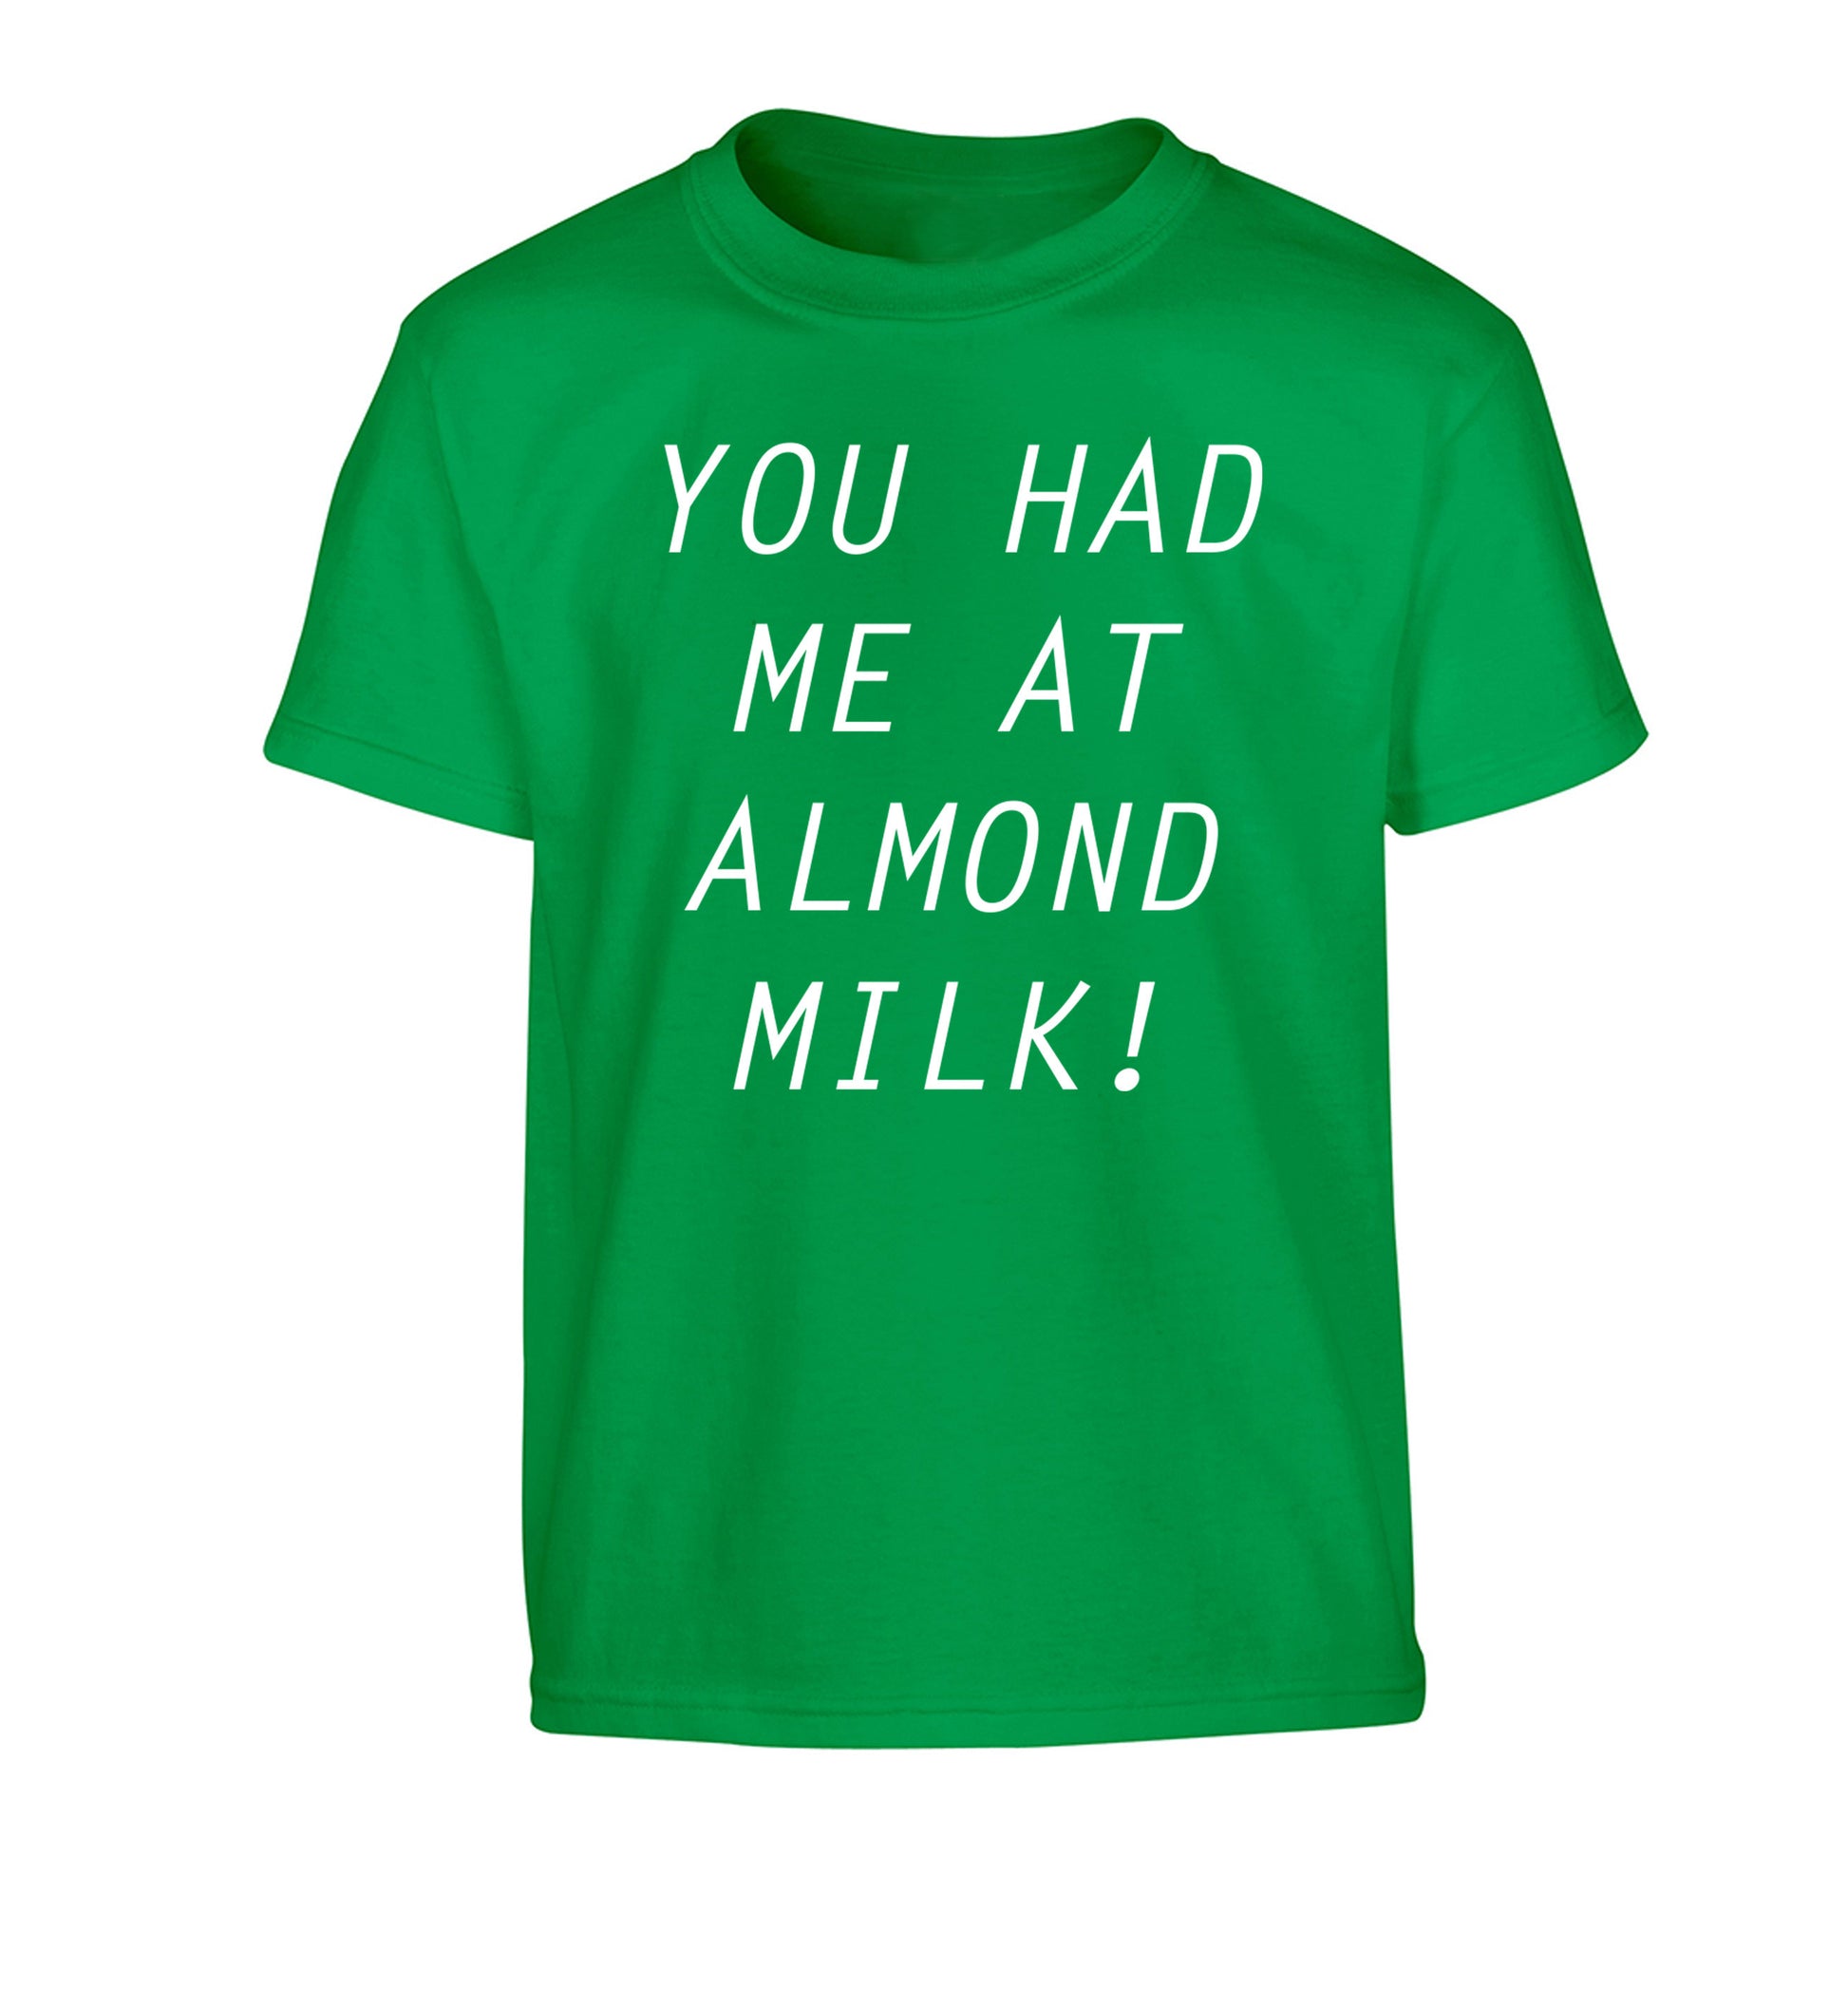 You had me at almond milk Children's green Tshirt 12-14 Years